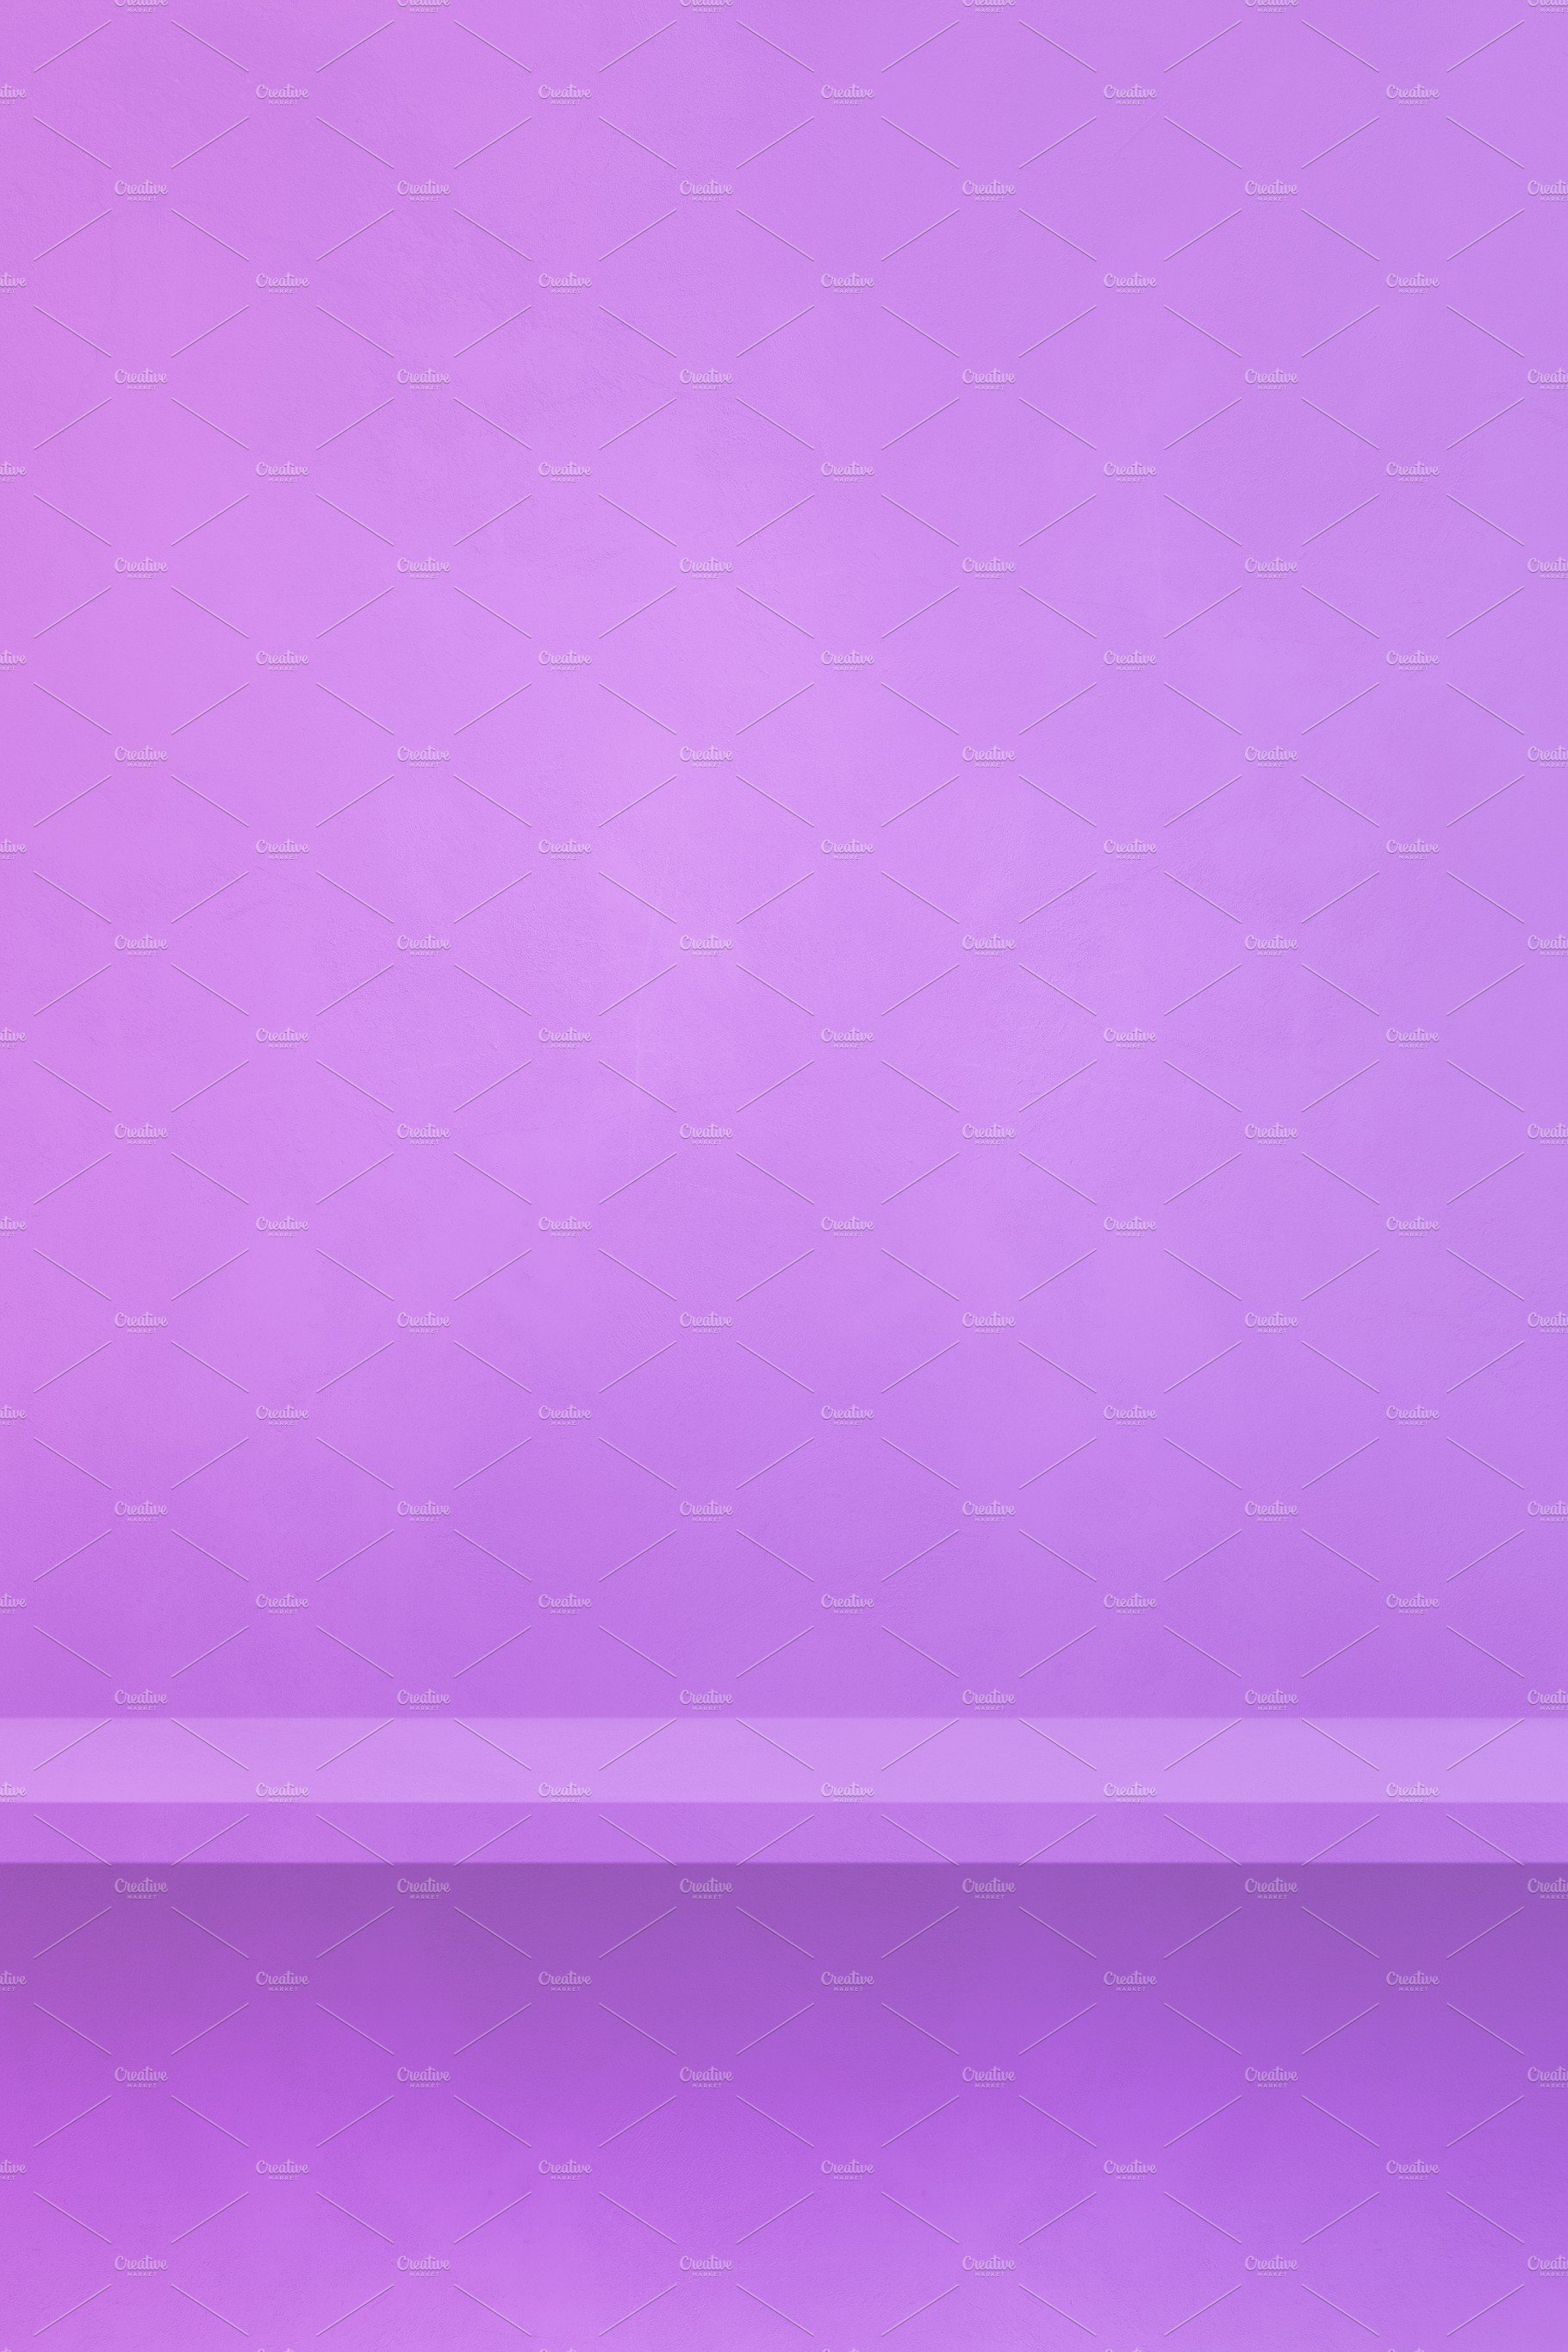 Empty shelf on a mauve wall. Background template. Vertical backd cover image.